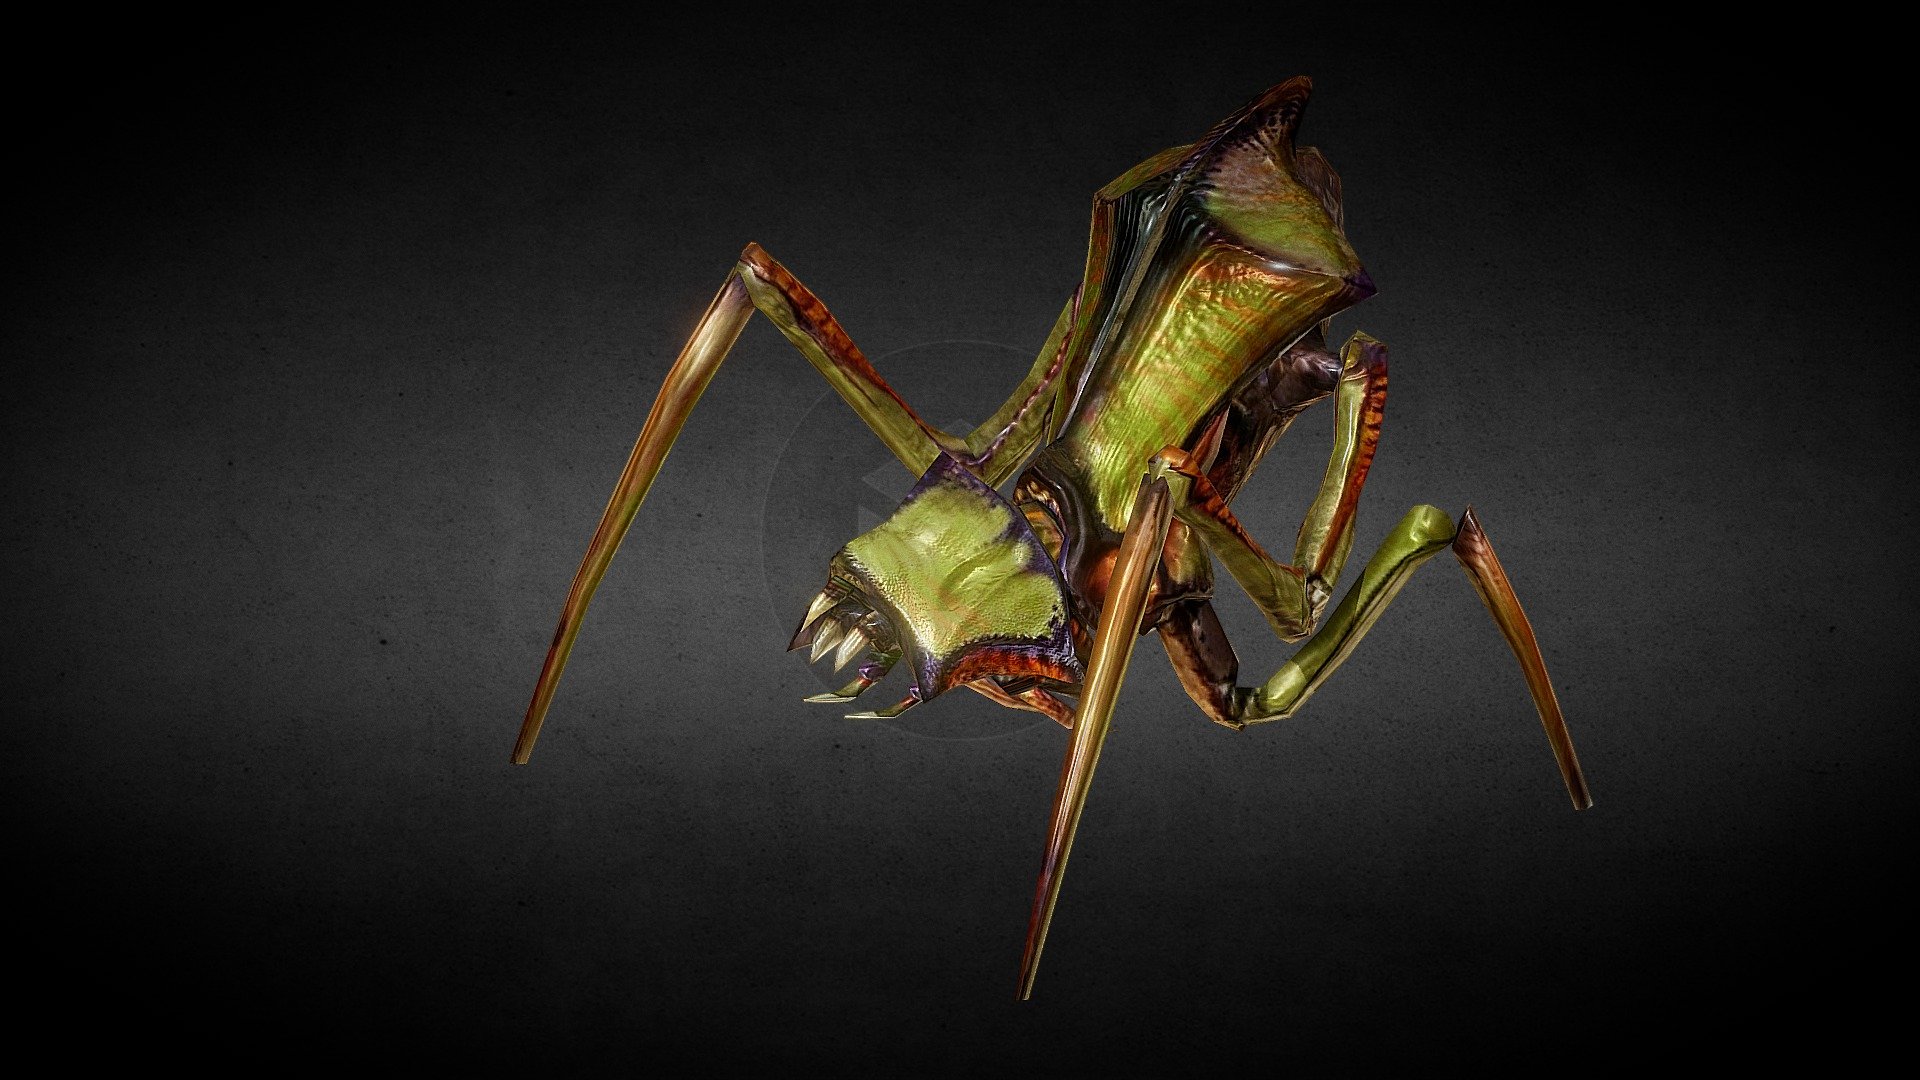 Antlions are a fictional insect-like alien species found in Valve Software's first-person shooter action computer game, Half-Life 2. They ended up on Earth after being transported from Xen by the portal storms, and adapted particularly well to their new environment. While they prefer sandy environments, these Antlions otherwise have little in common with real-life antlions, preferring to directly assault prey rather than passively trap them. Antlions appear starting in the “Highway 17” chapter of Half-Life 2 and remain well into the “Nova Prospekt” chapter. They are a constant threat throughout Half-Life 2: Episode One, and the beginning of Half-Life 2: Episode Two prominently focuses on their nests 3d model